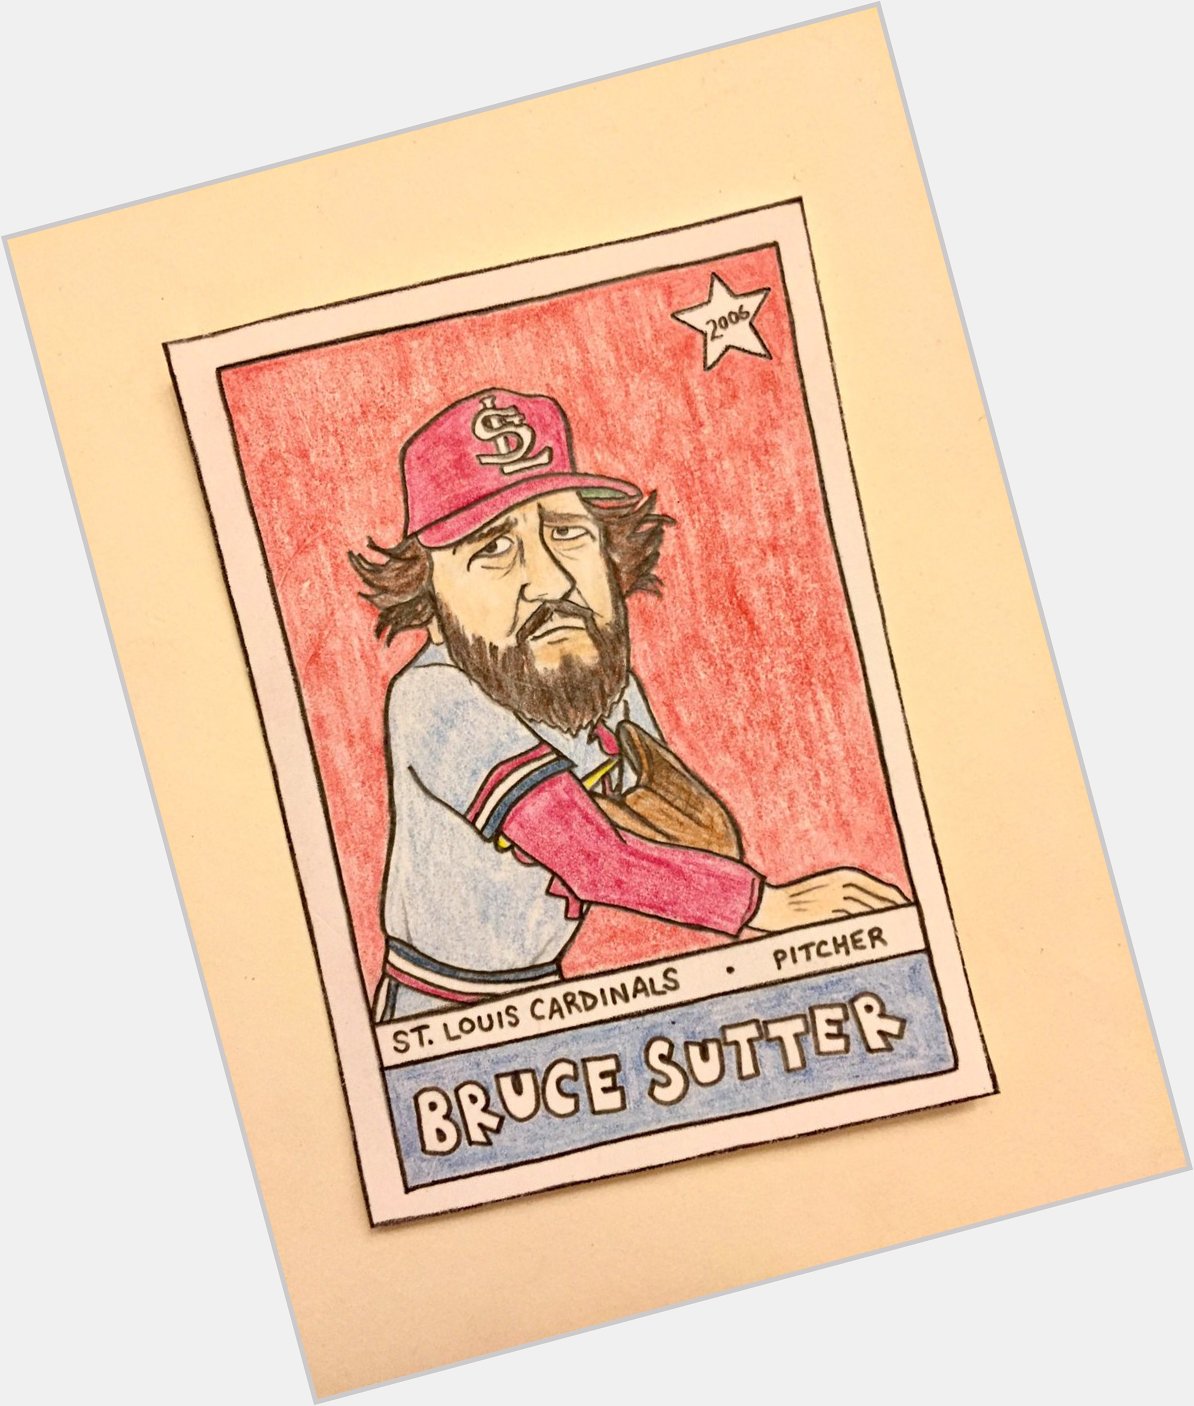 Wishing a happy birthday to Hall of Famer Bruce Sutter!  